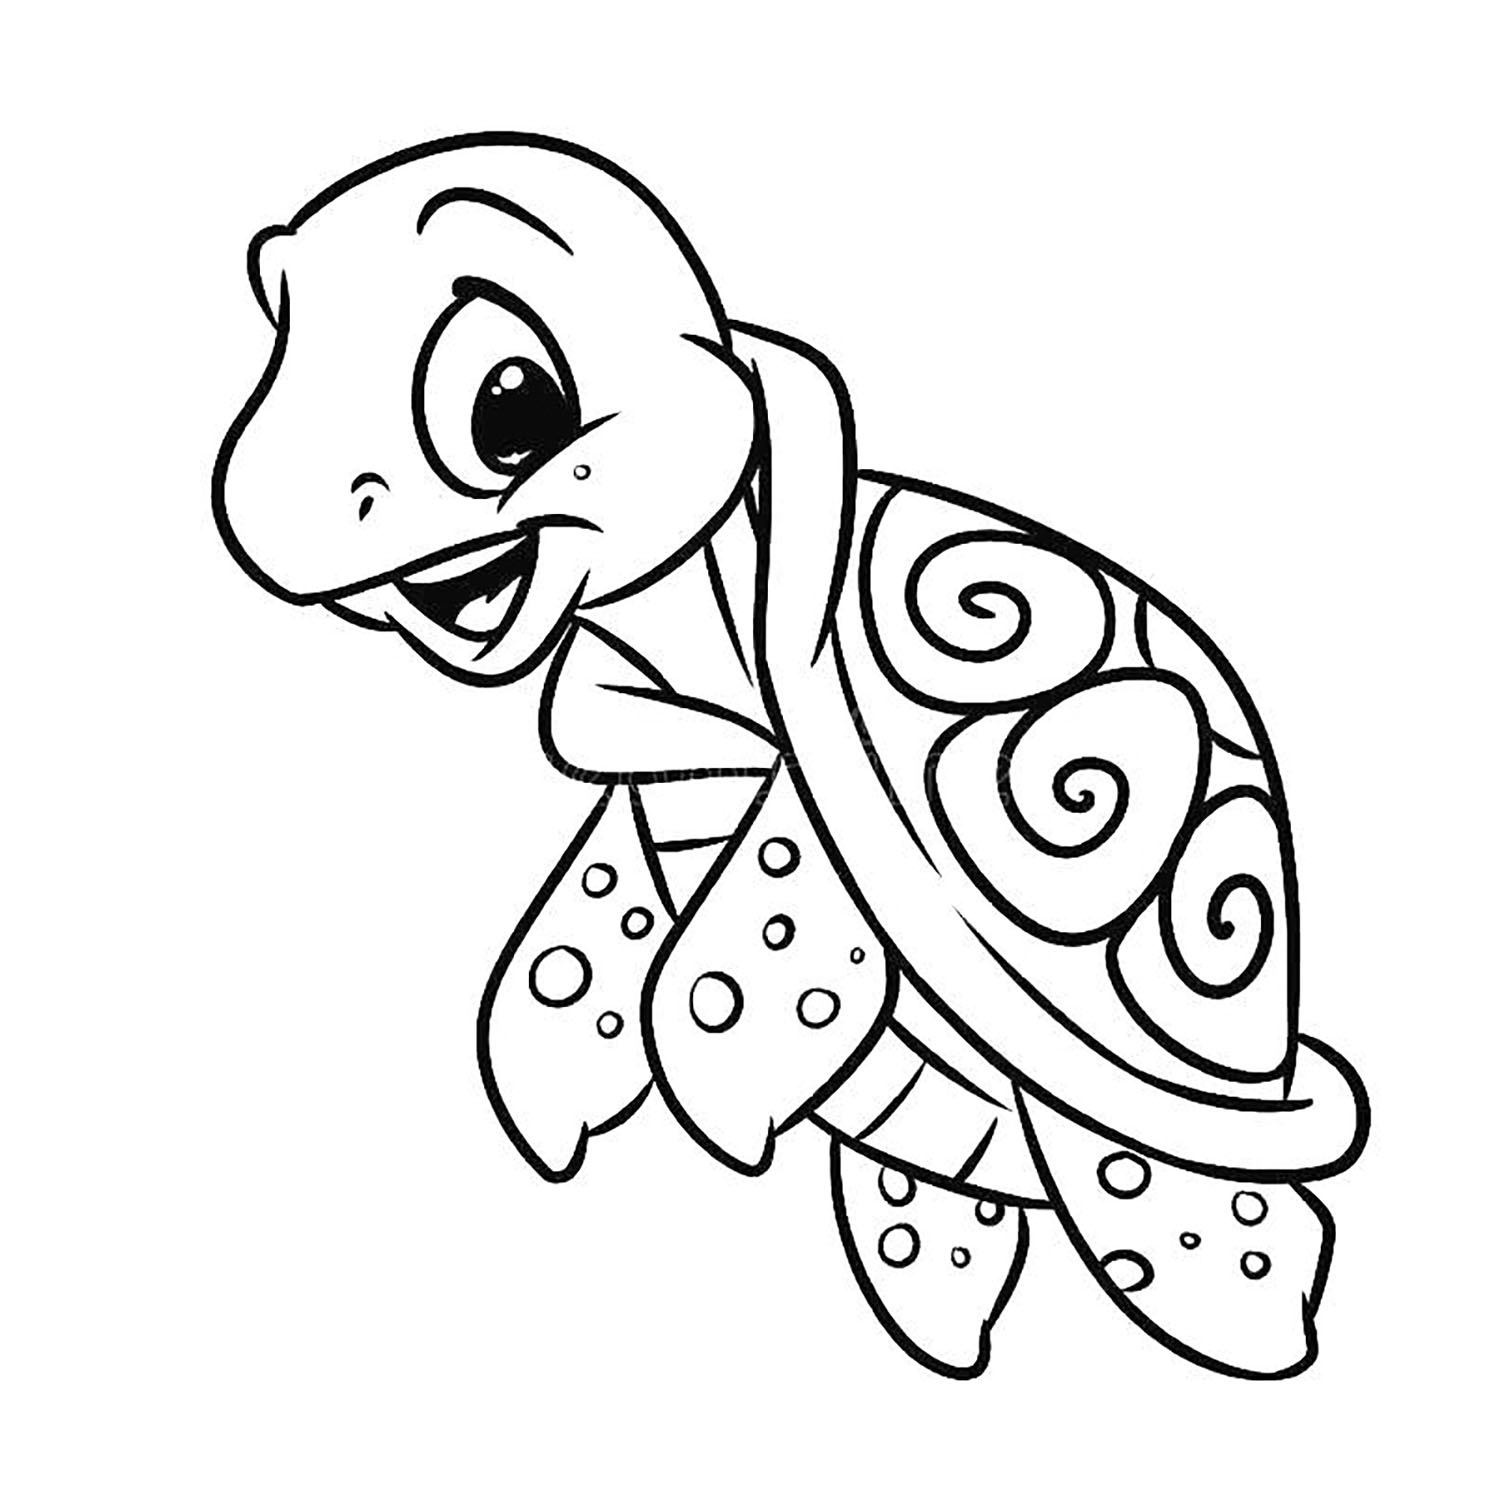 Free Printable Turtle Coloring Pages